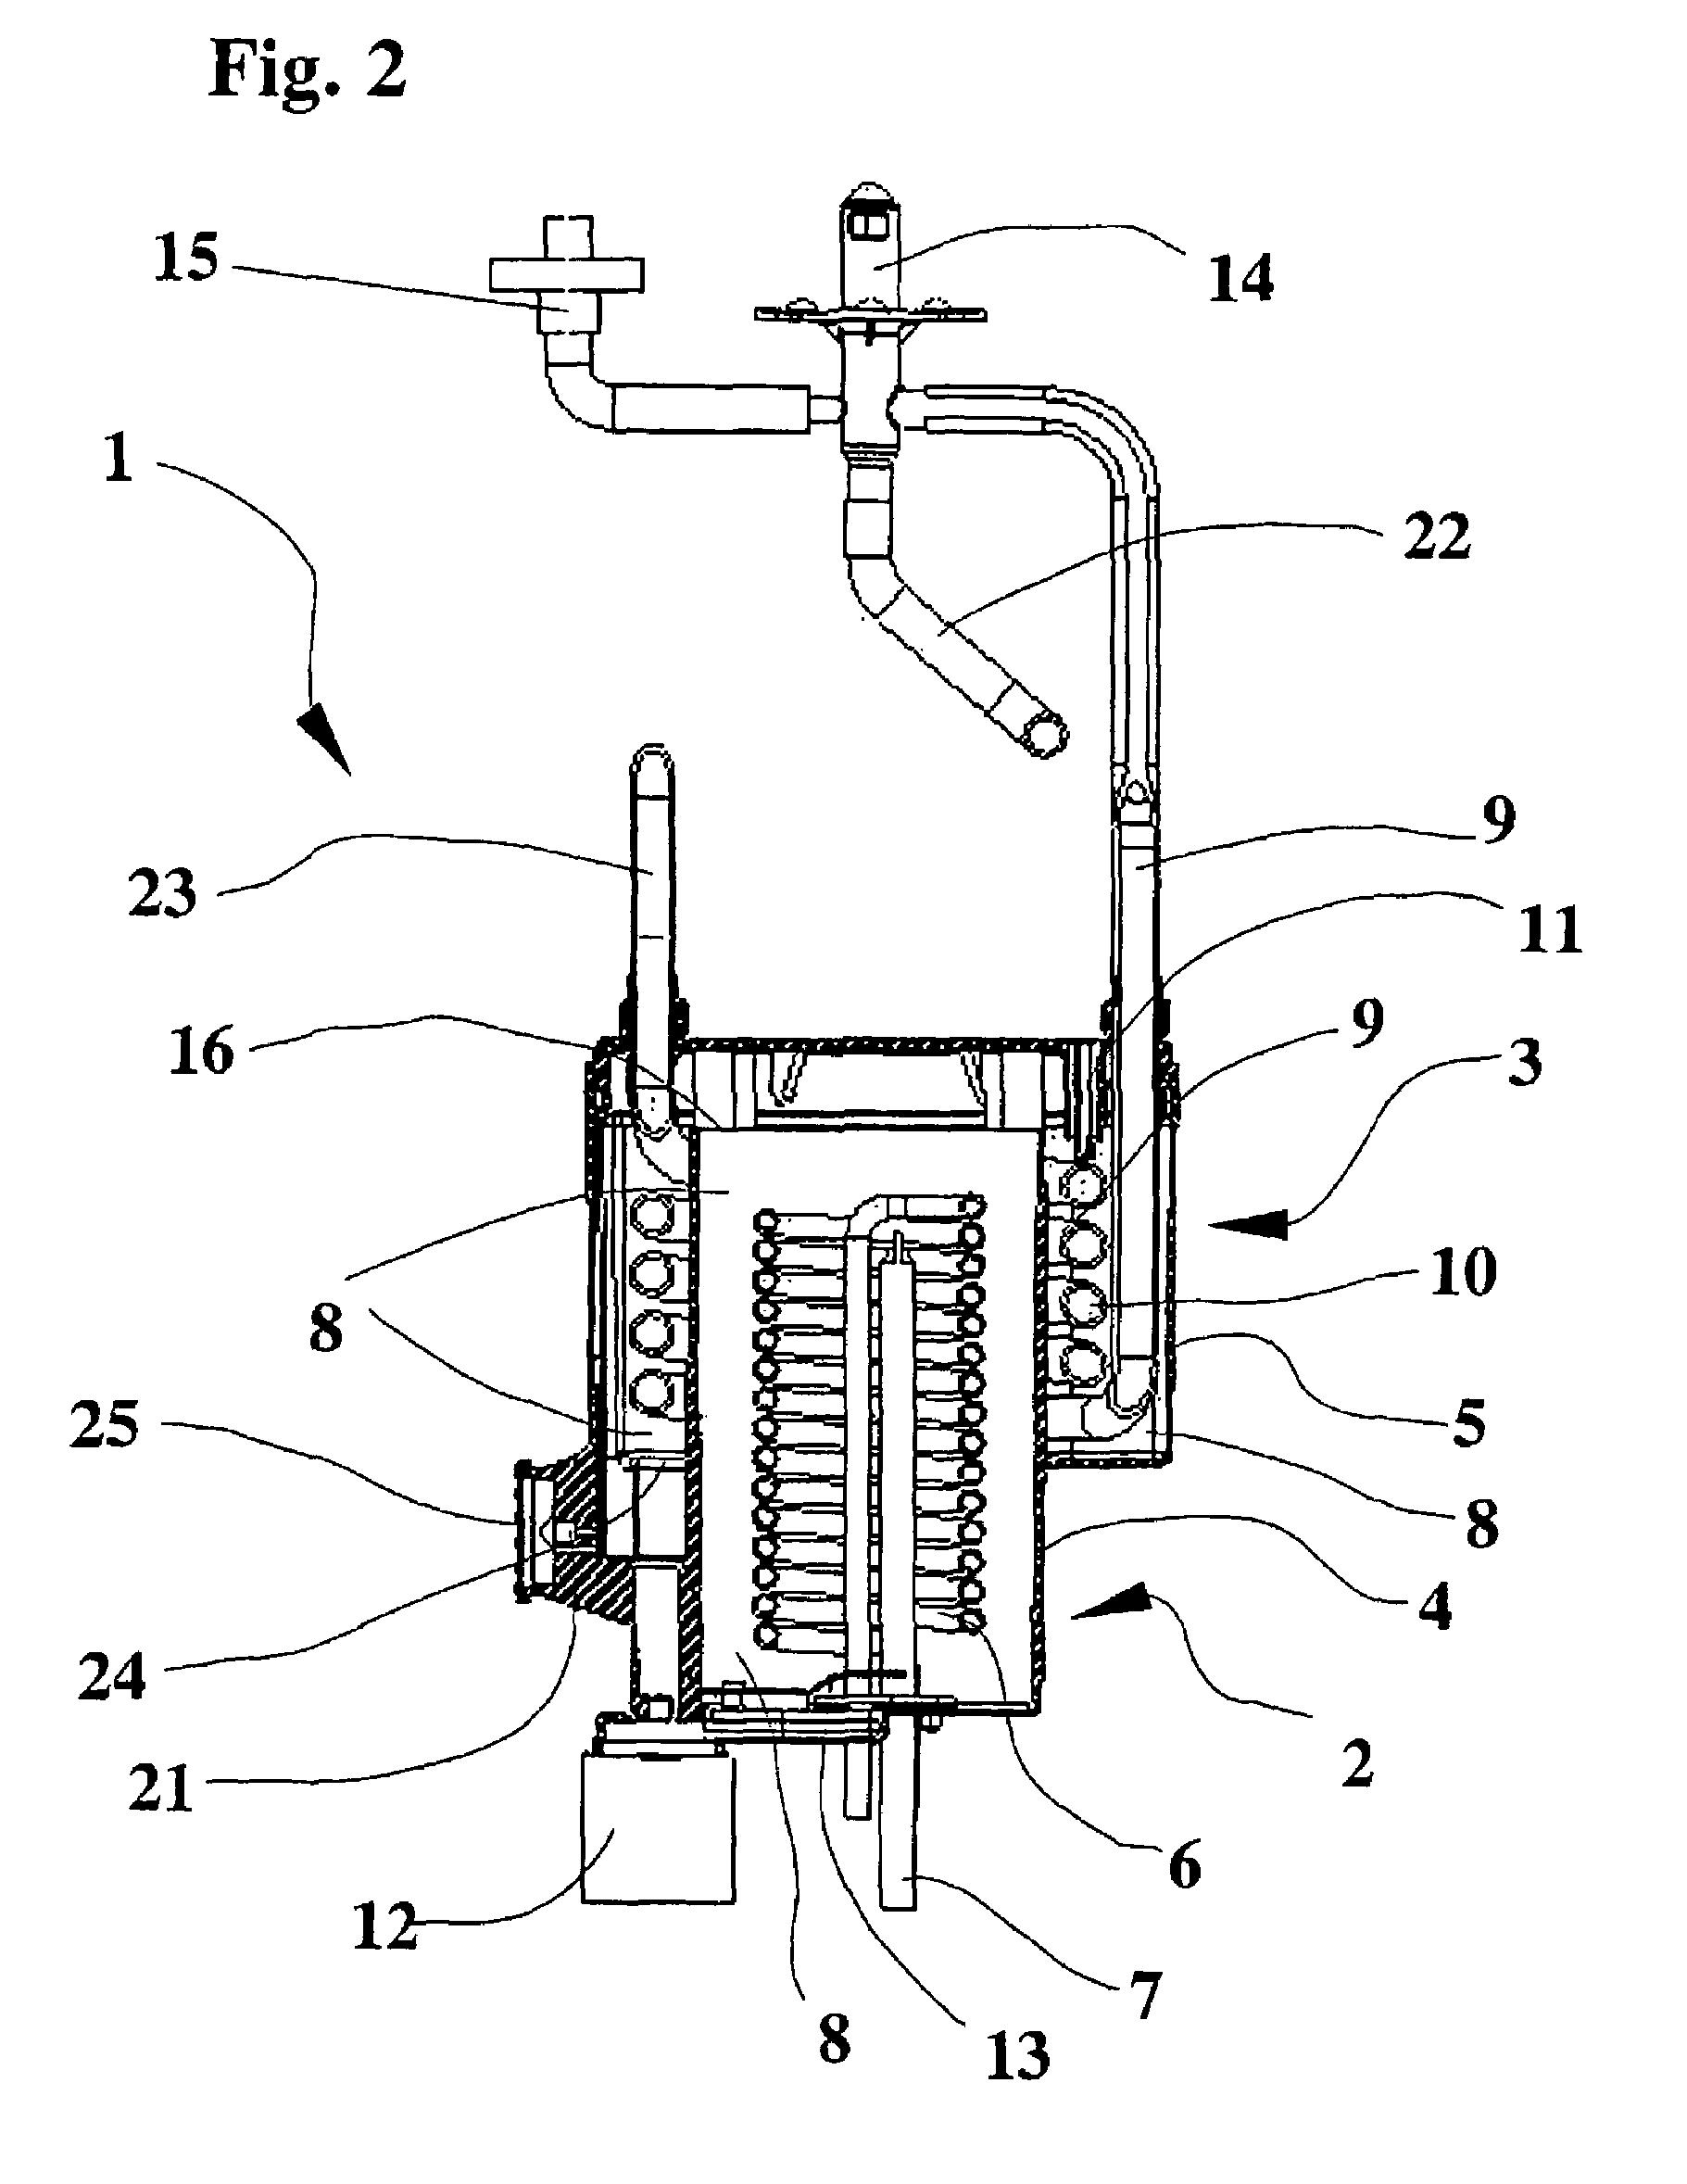 Fluid cooling system, cooled fluid dispenser comprising the later, and methods for sterilization thereof